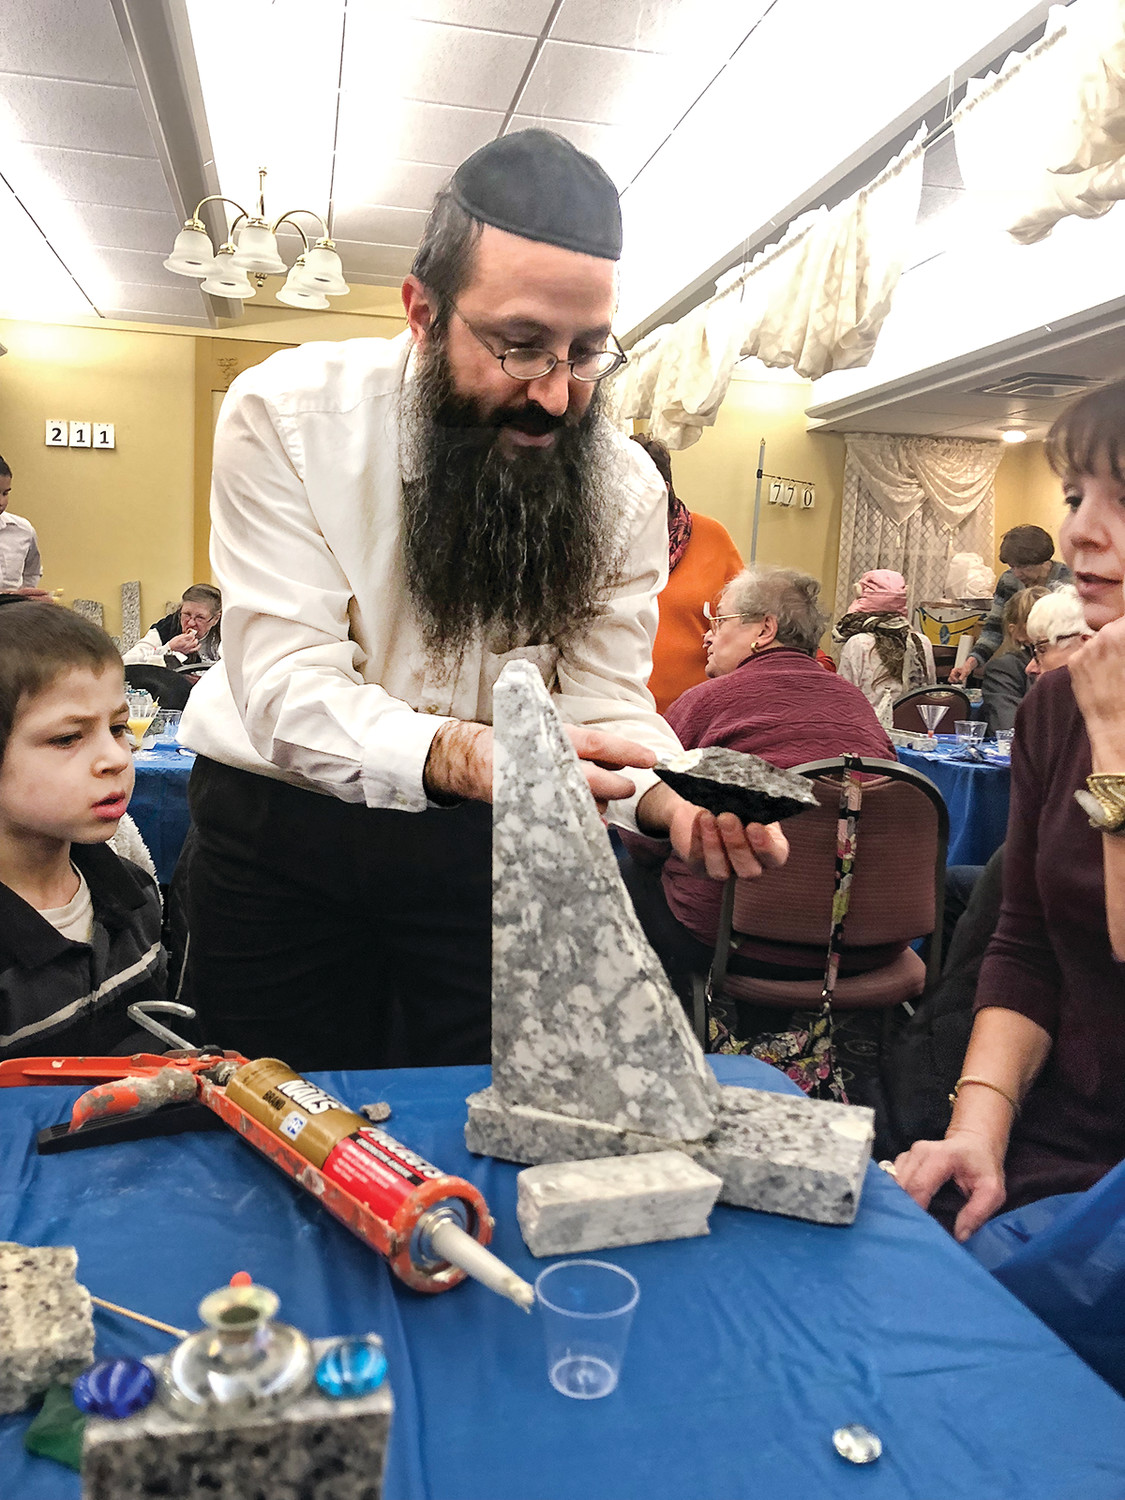 At a recent Menorahs and Martinis event hosted by West Bay Chabad, Beverly Paris reports that 40 to 50 ladies attended and all went home with a handmade menorah. Shoshana Laufer hosted and Rabbi Yossi Laufer helped. Paris reports there was good food and good company as well as beautiful menorahs.